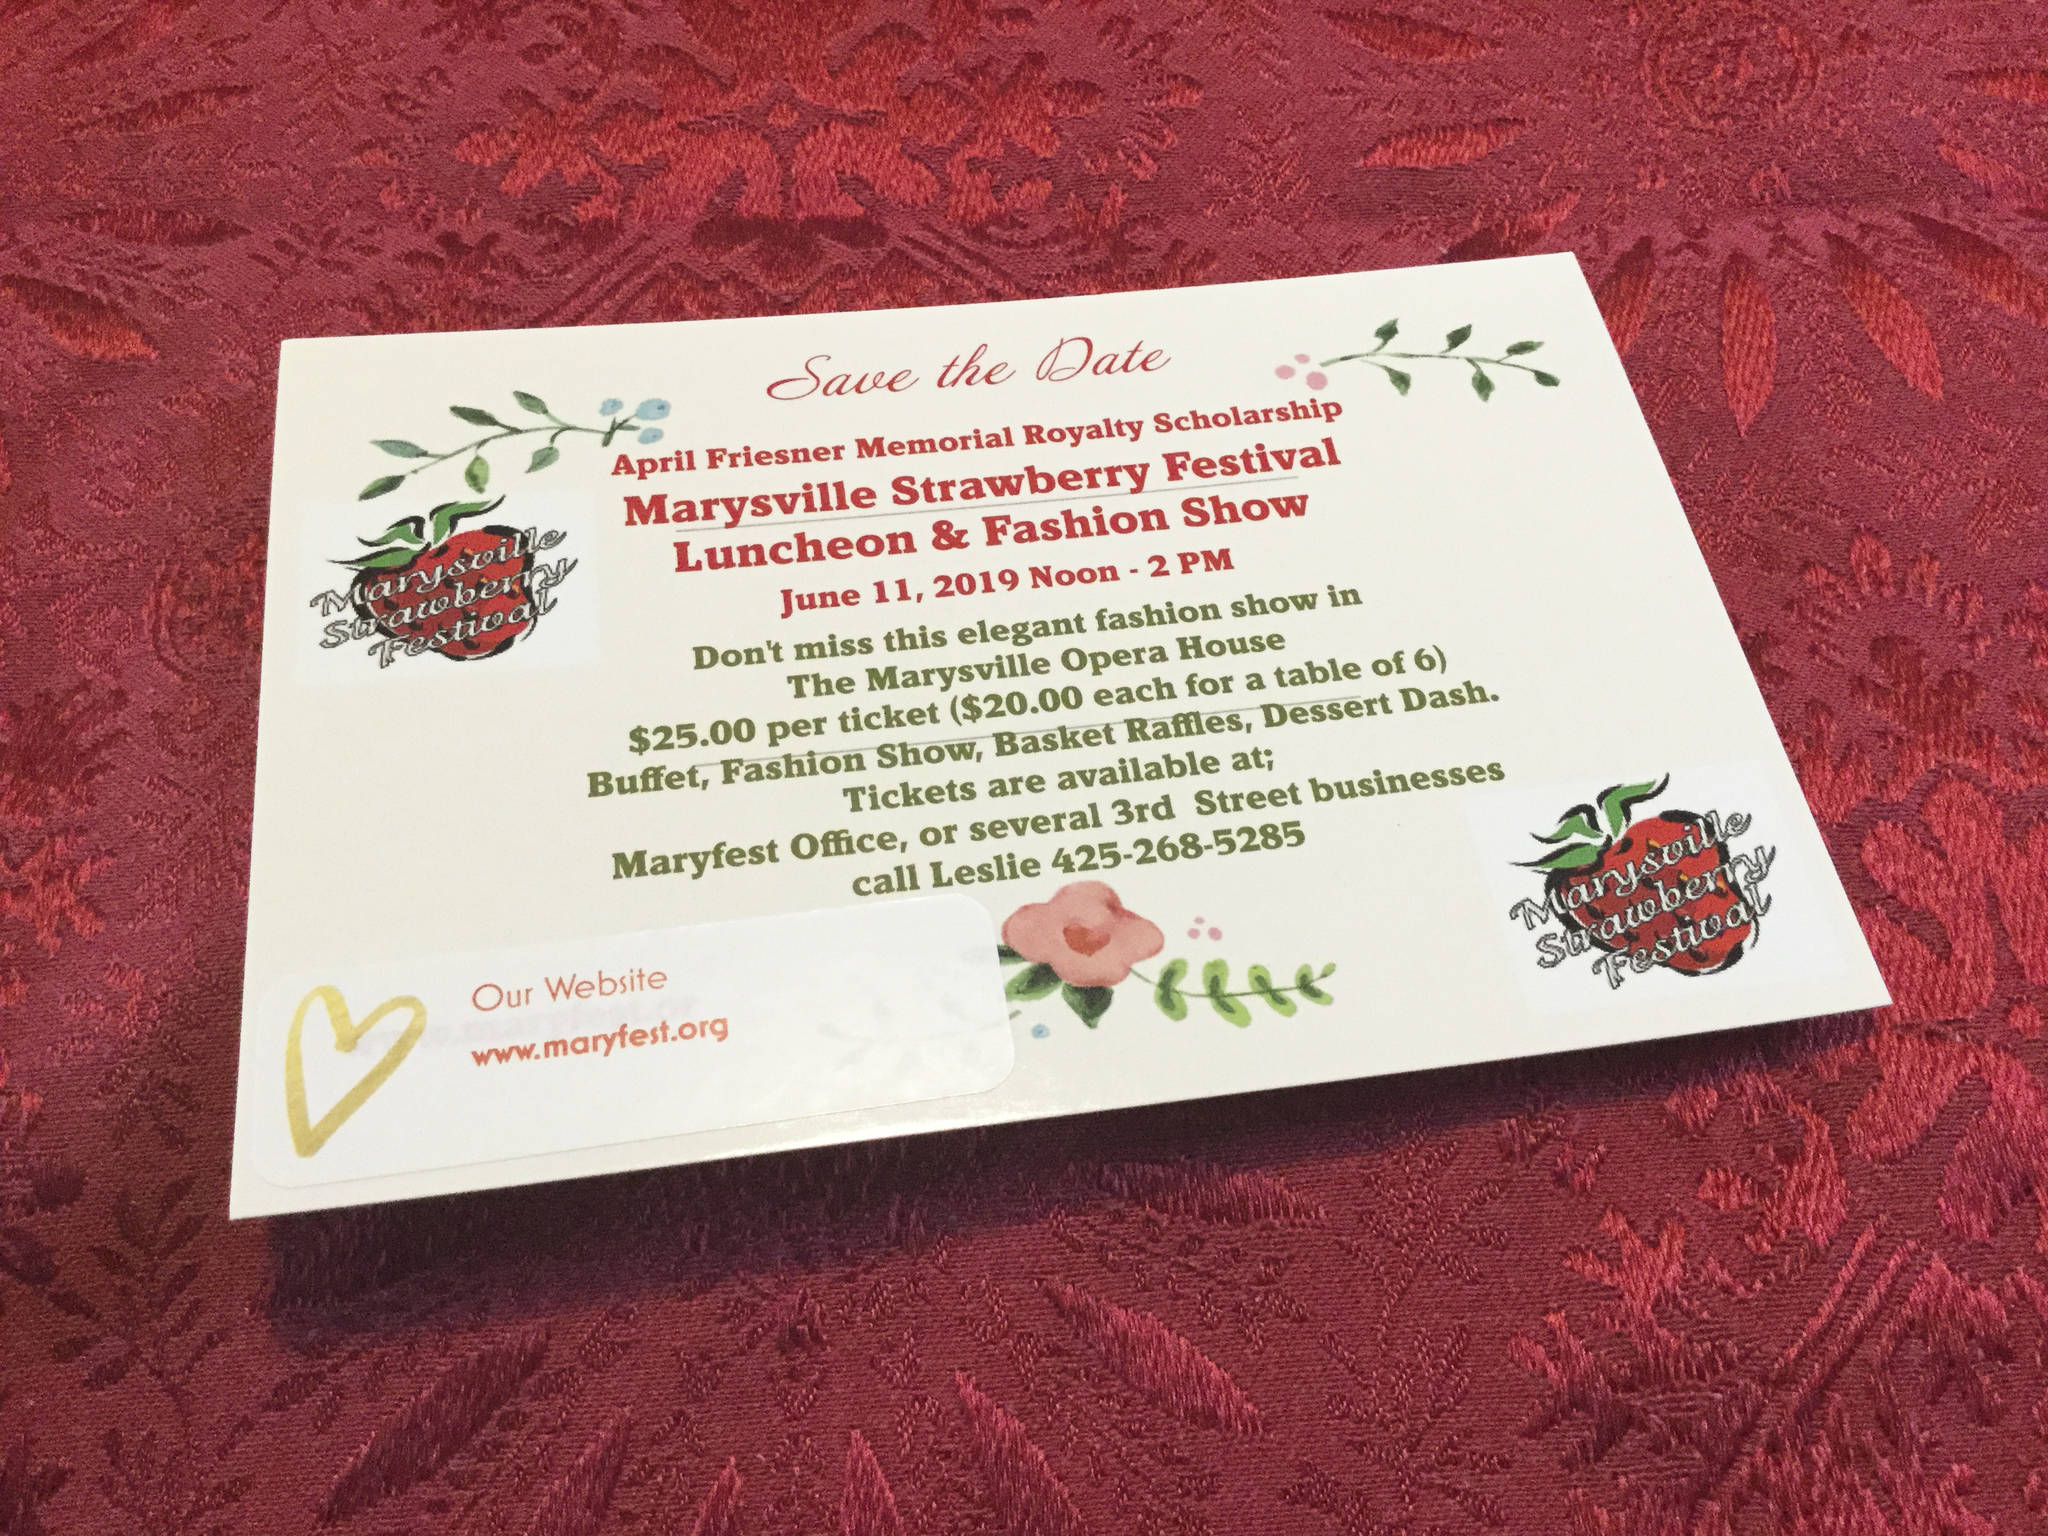 Tickets now on sale for Marysville Strawberry Fashion Show and Luncheon